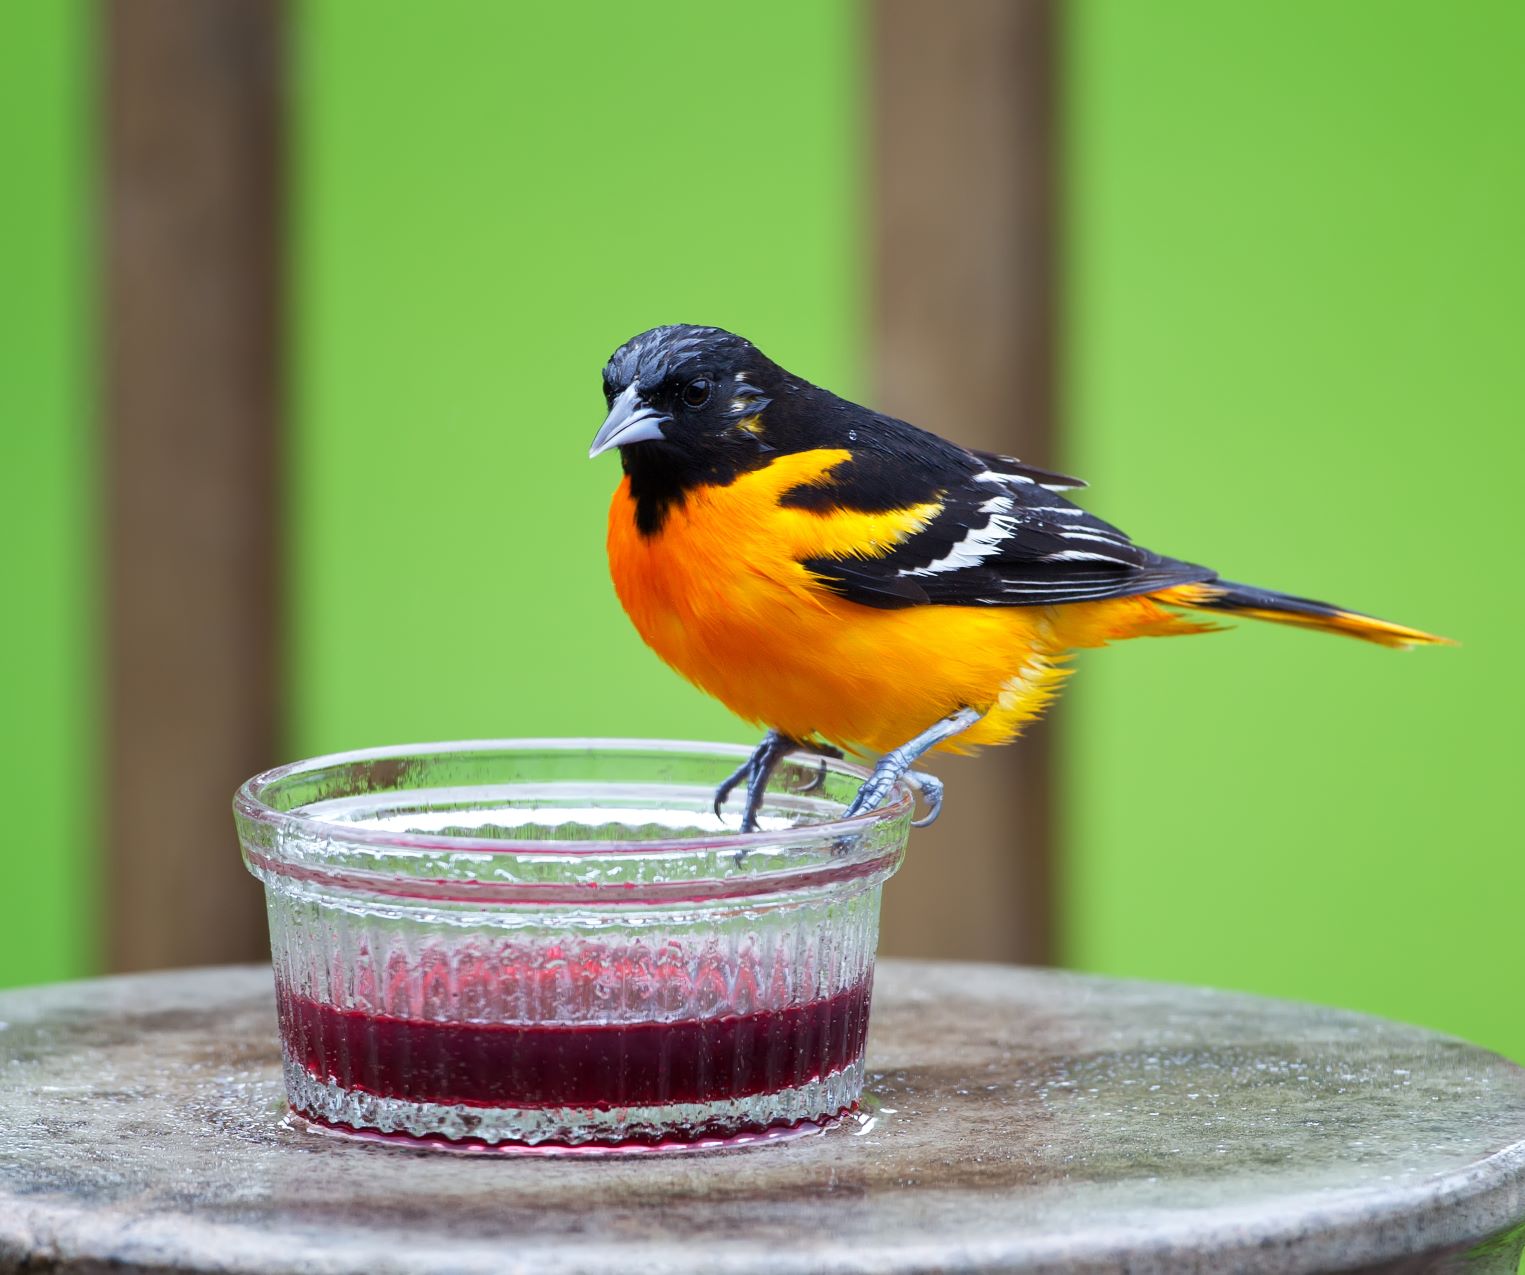 Backyard Birds Slideshow: A brilliant orange and black male Baltimore Oriole stands on a short glass jar of grape jelly sitting on an outdoor table in front of bright, blurry green backdrop.